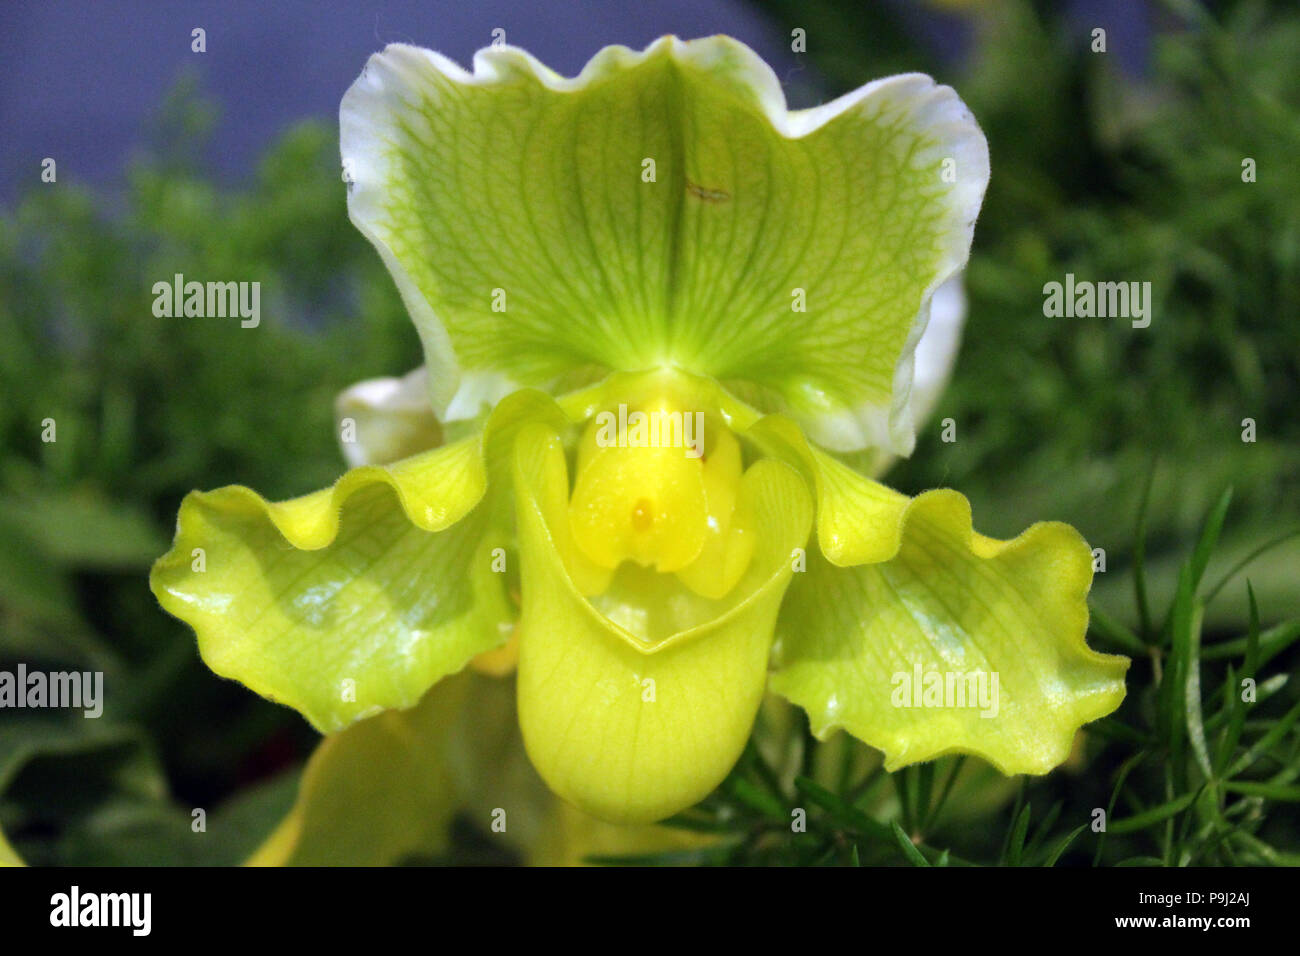 Close up of a green, yellow and white Lady's Slipper Orchid in full bloom Stock Photo